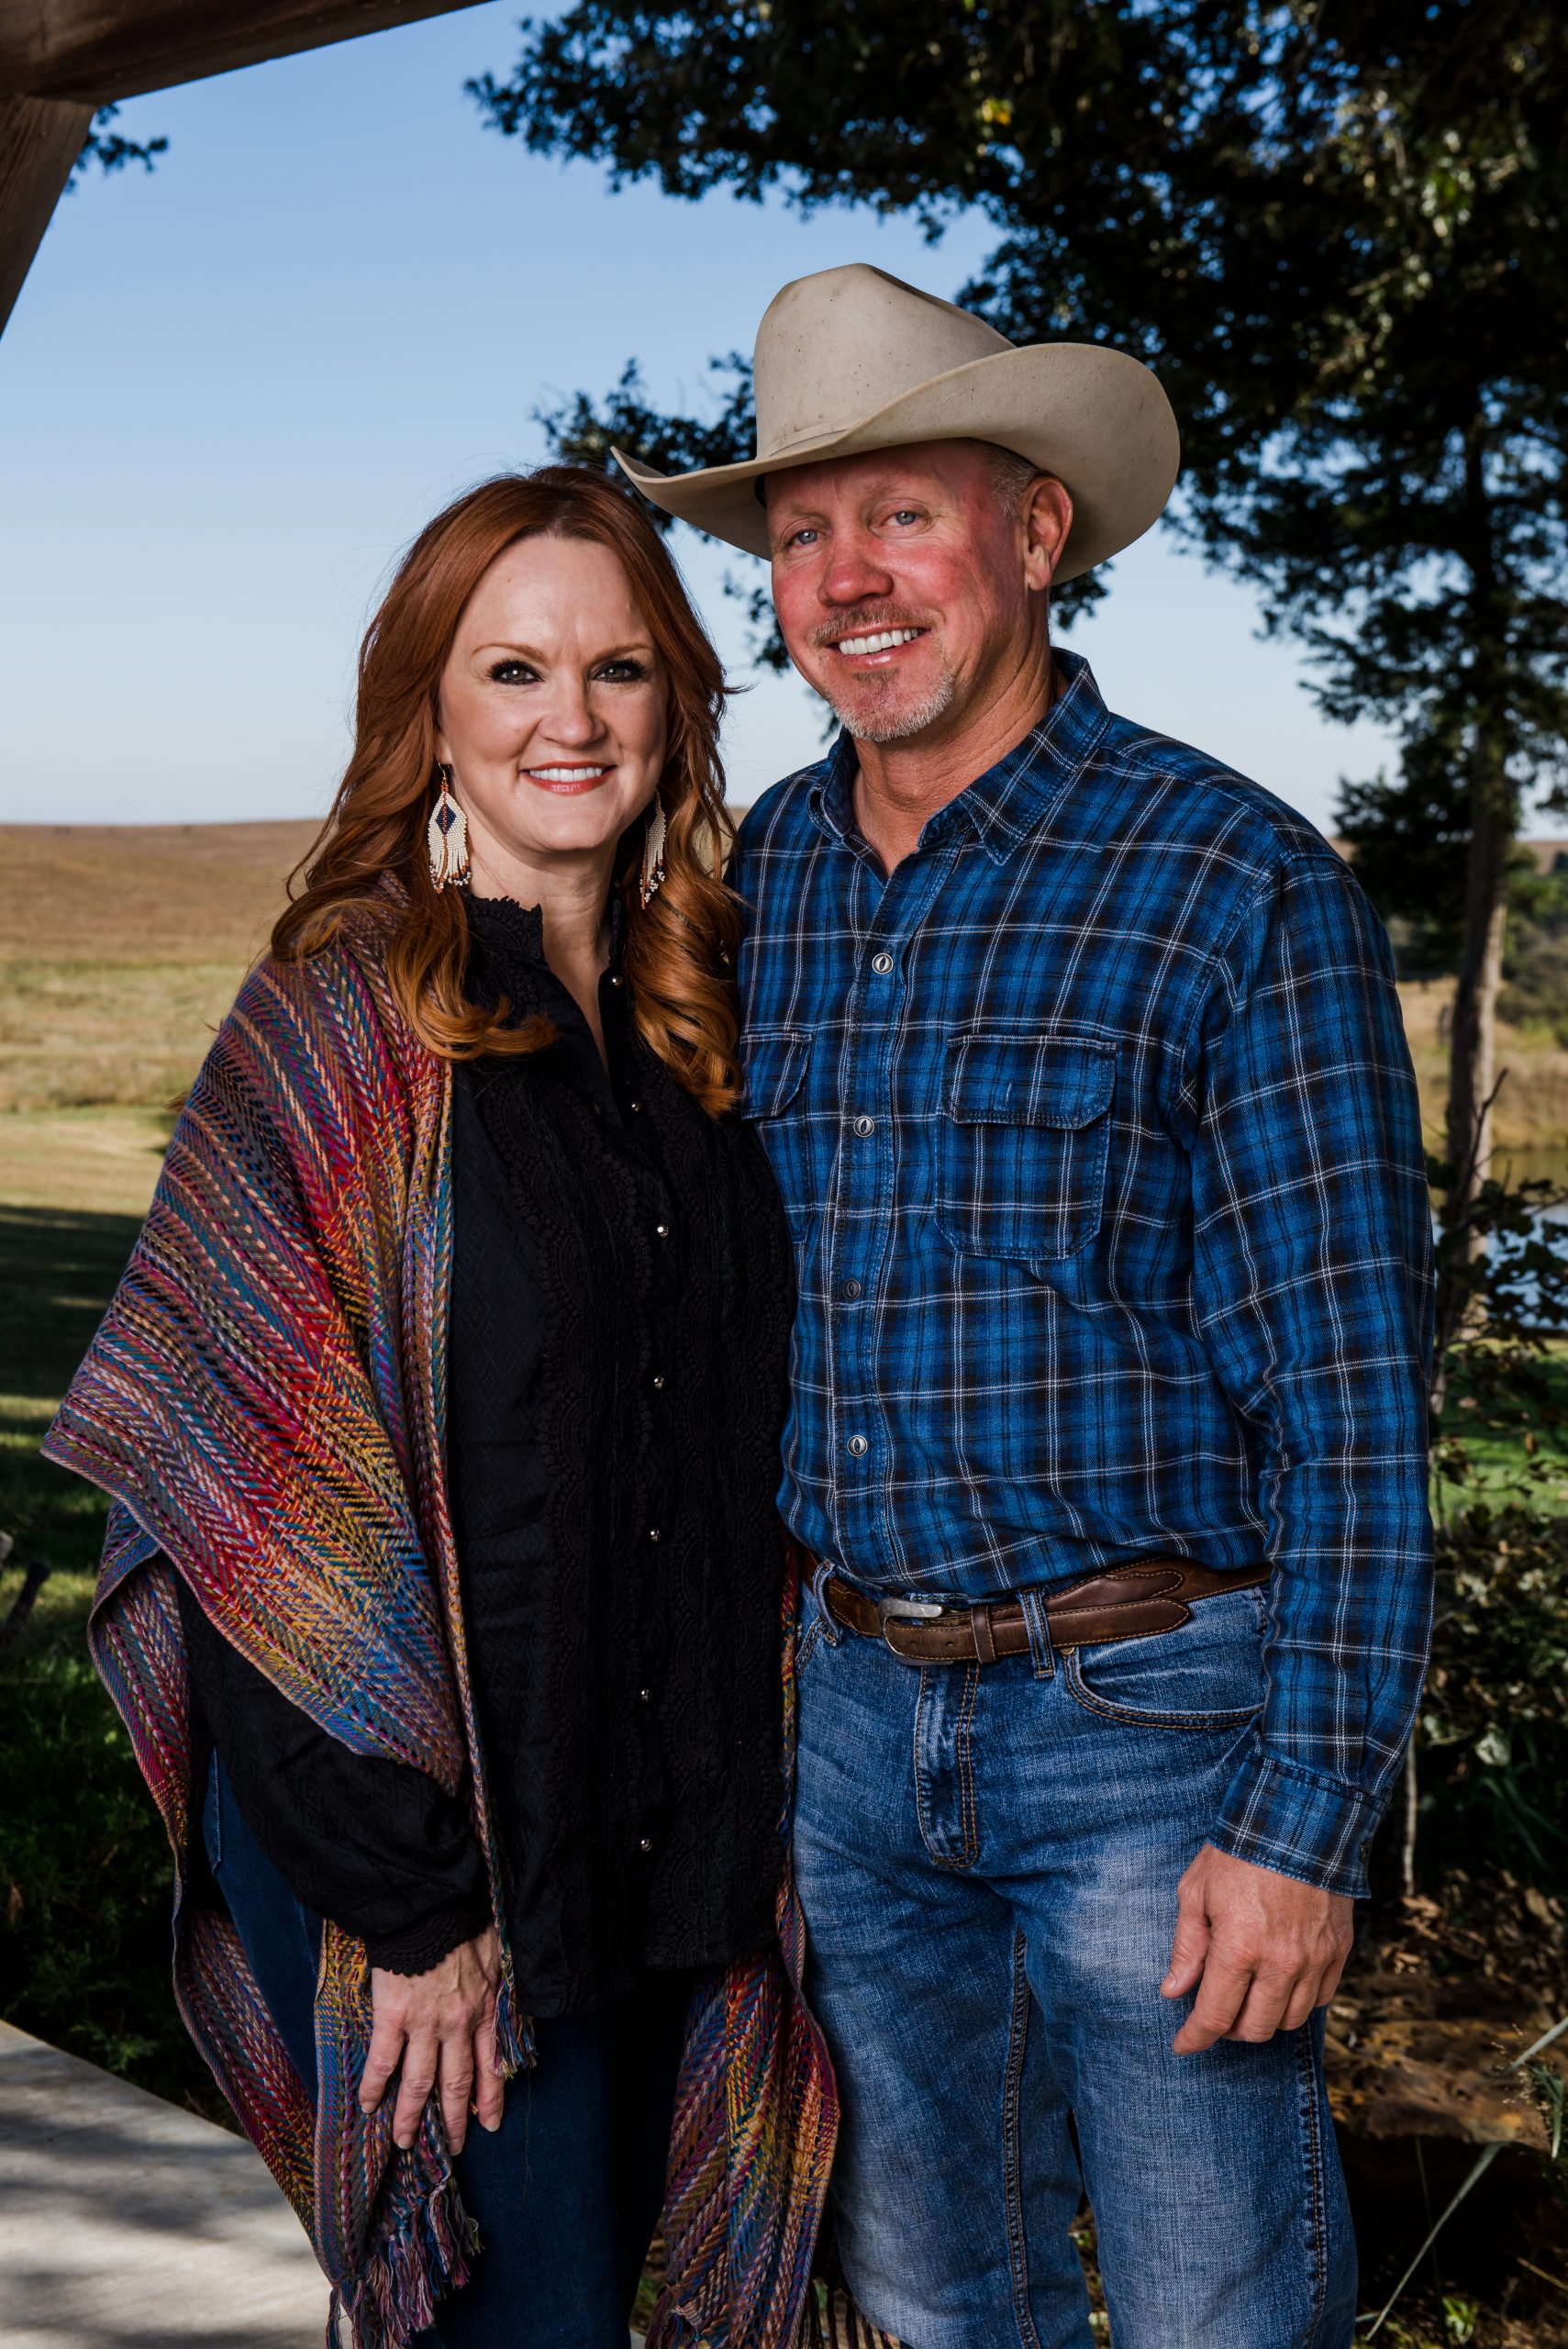 Ree Drummond, January 2020 - Cowboys and Indians Magazine